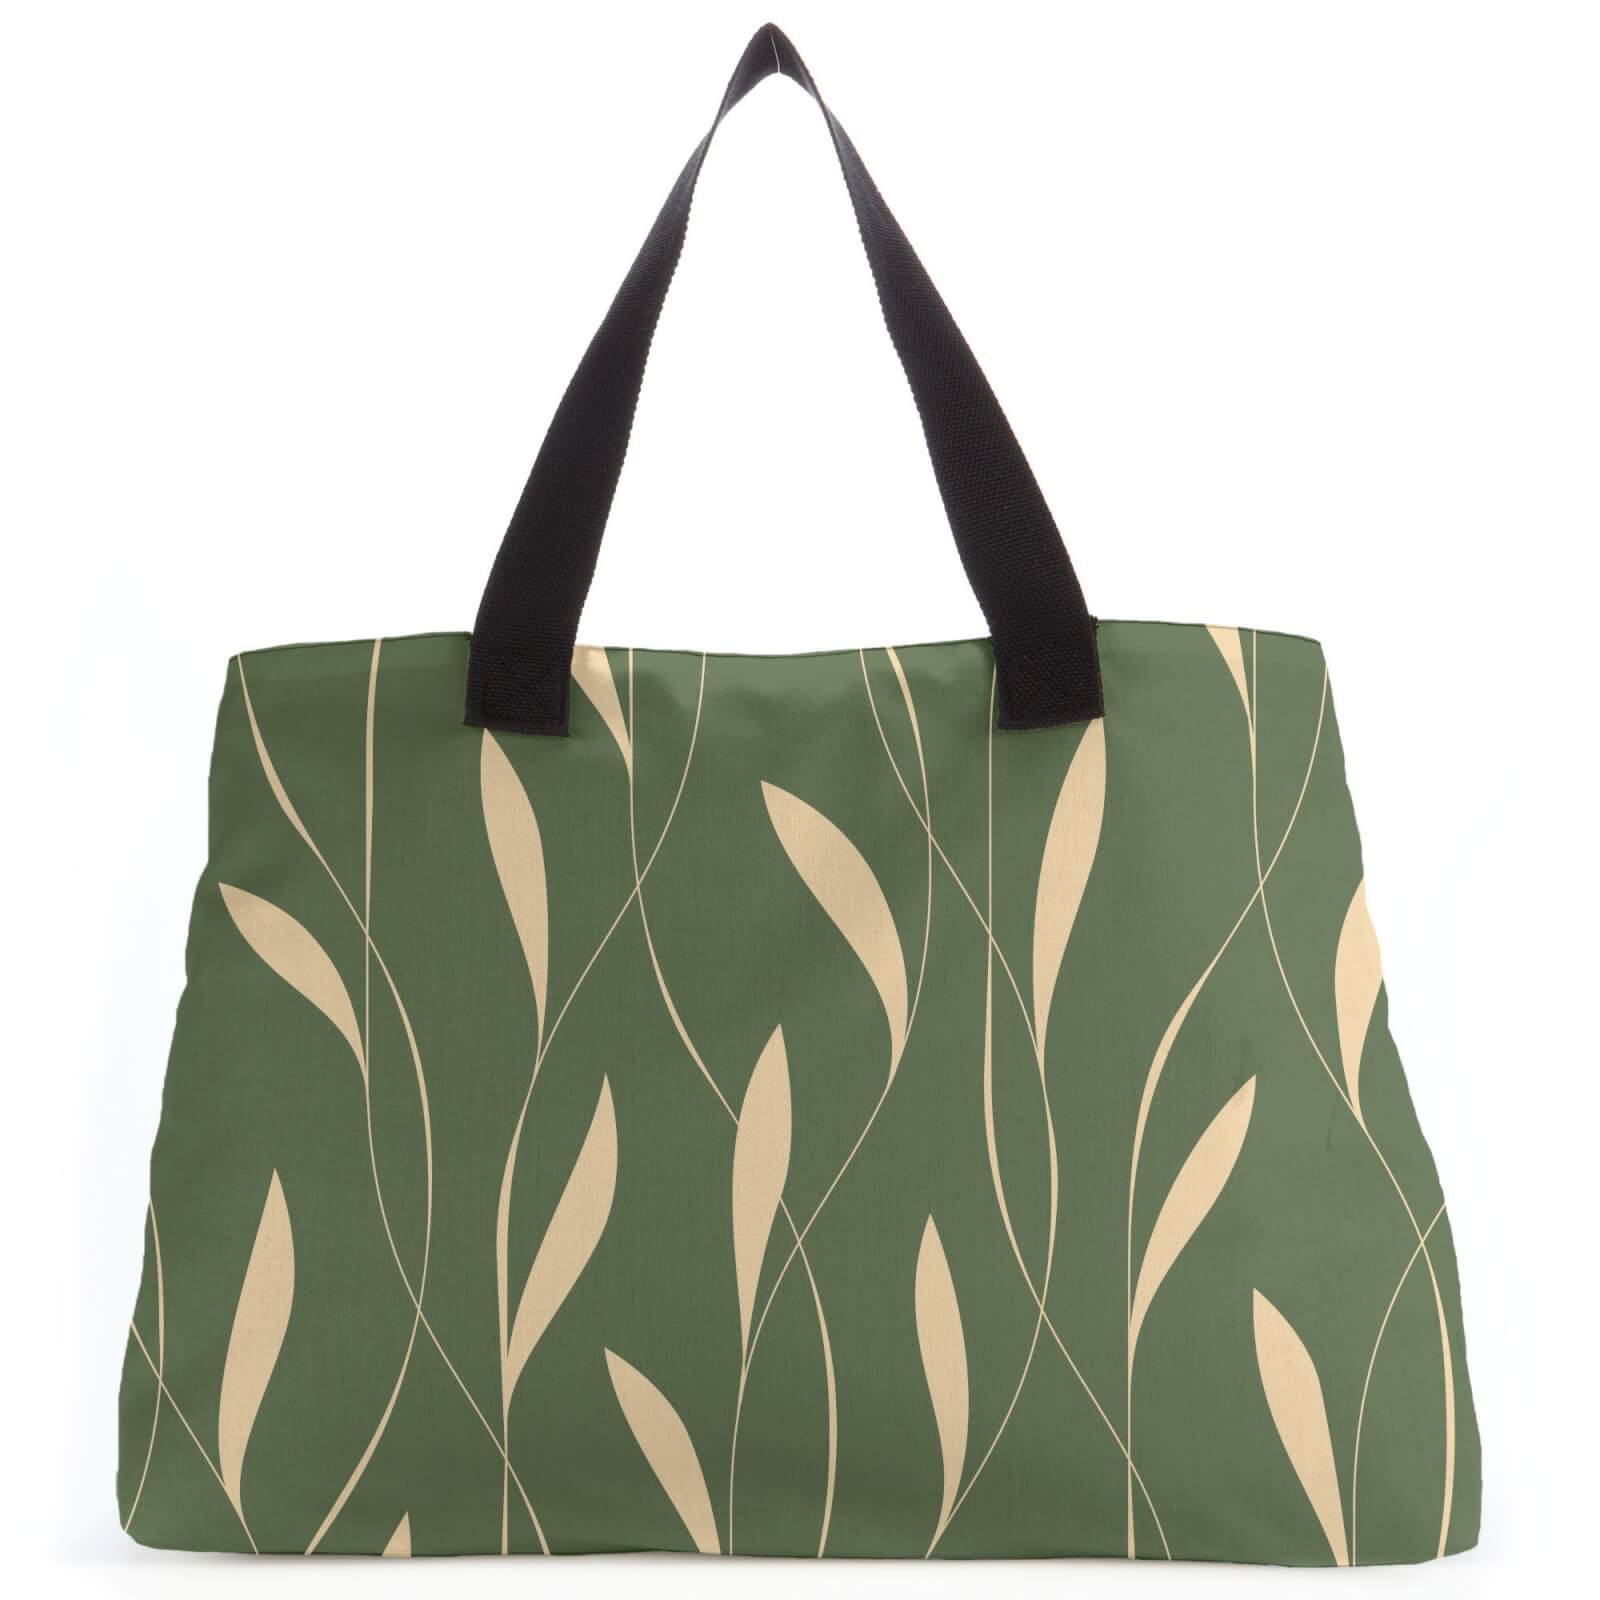 Willow Branch Tote Bag